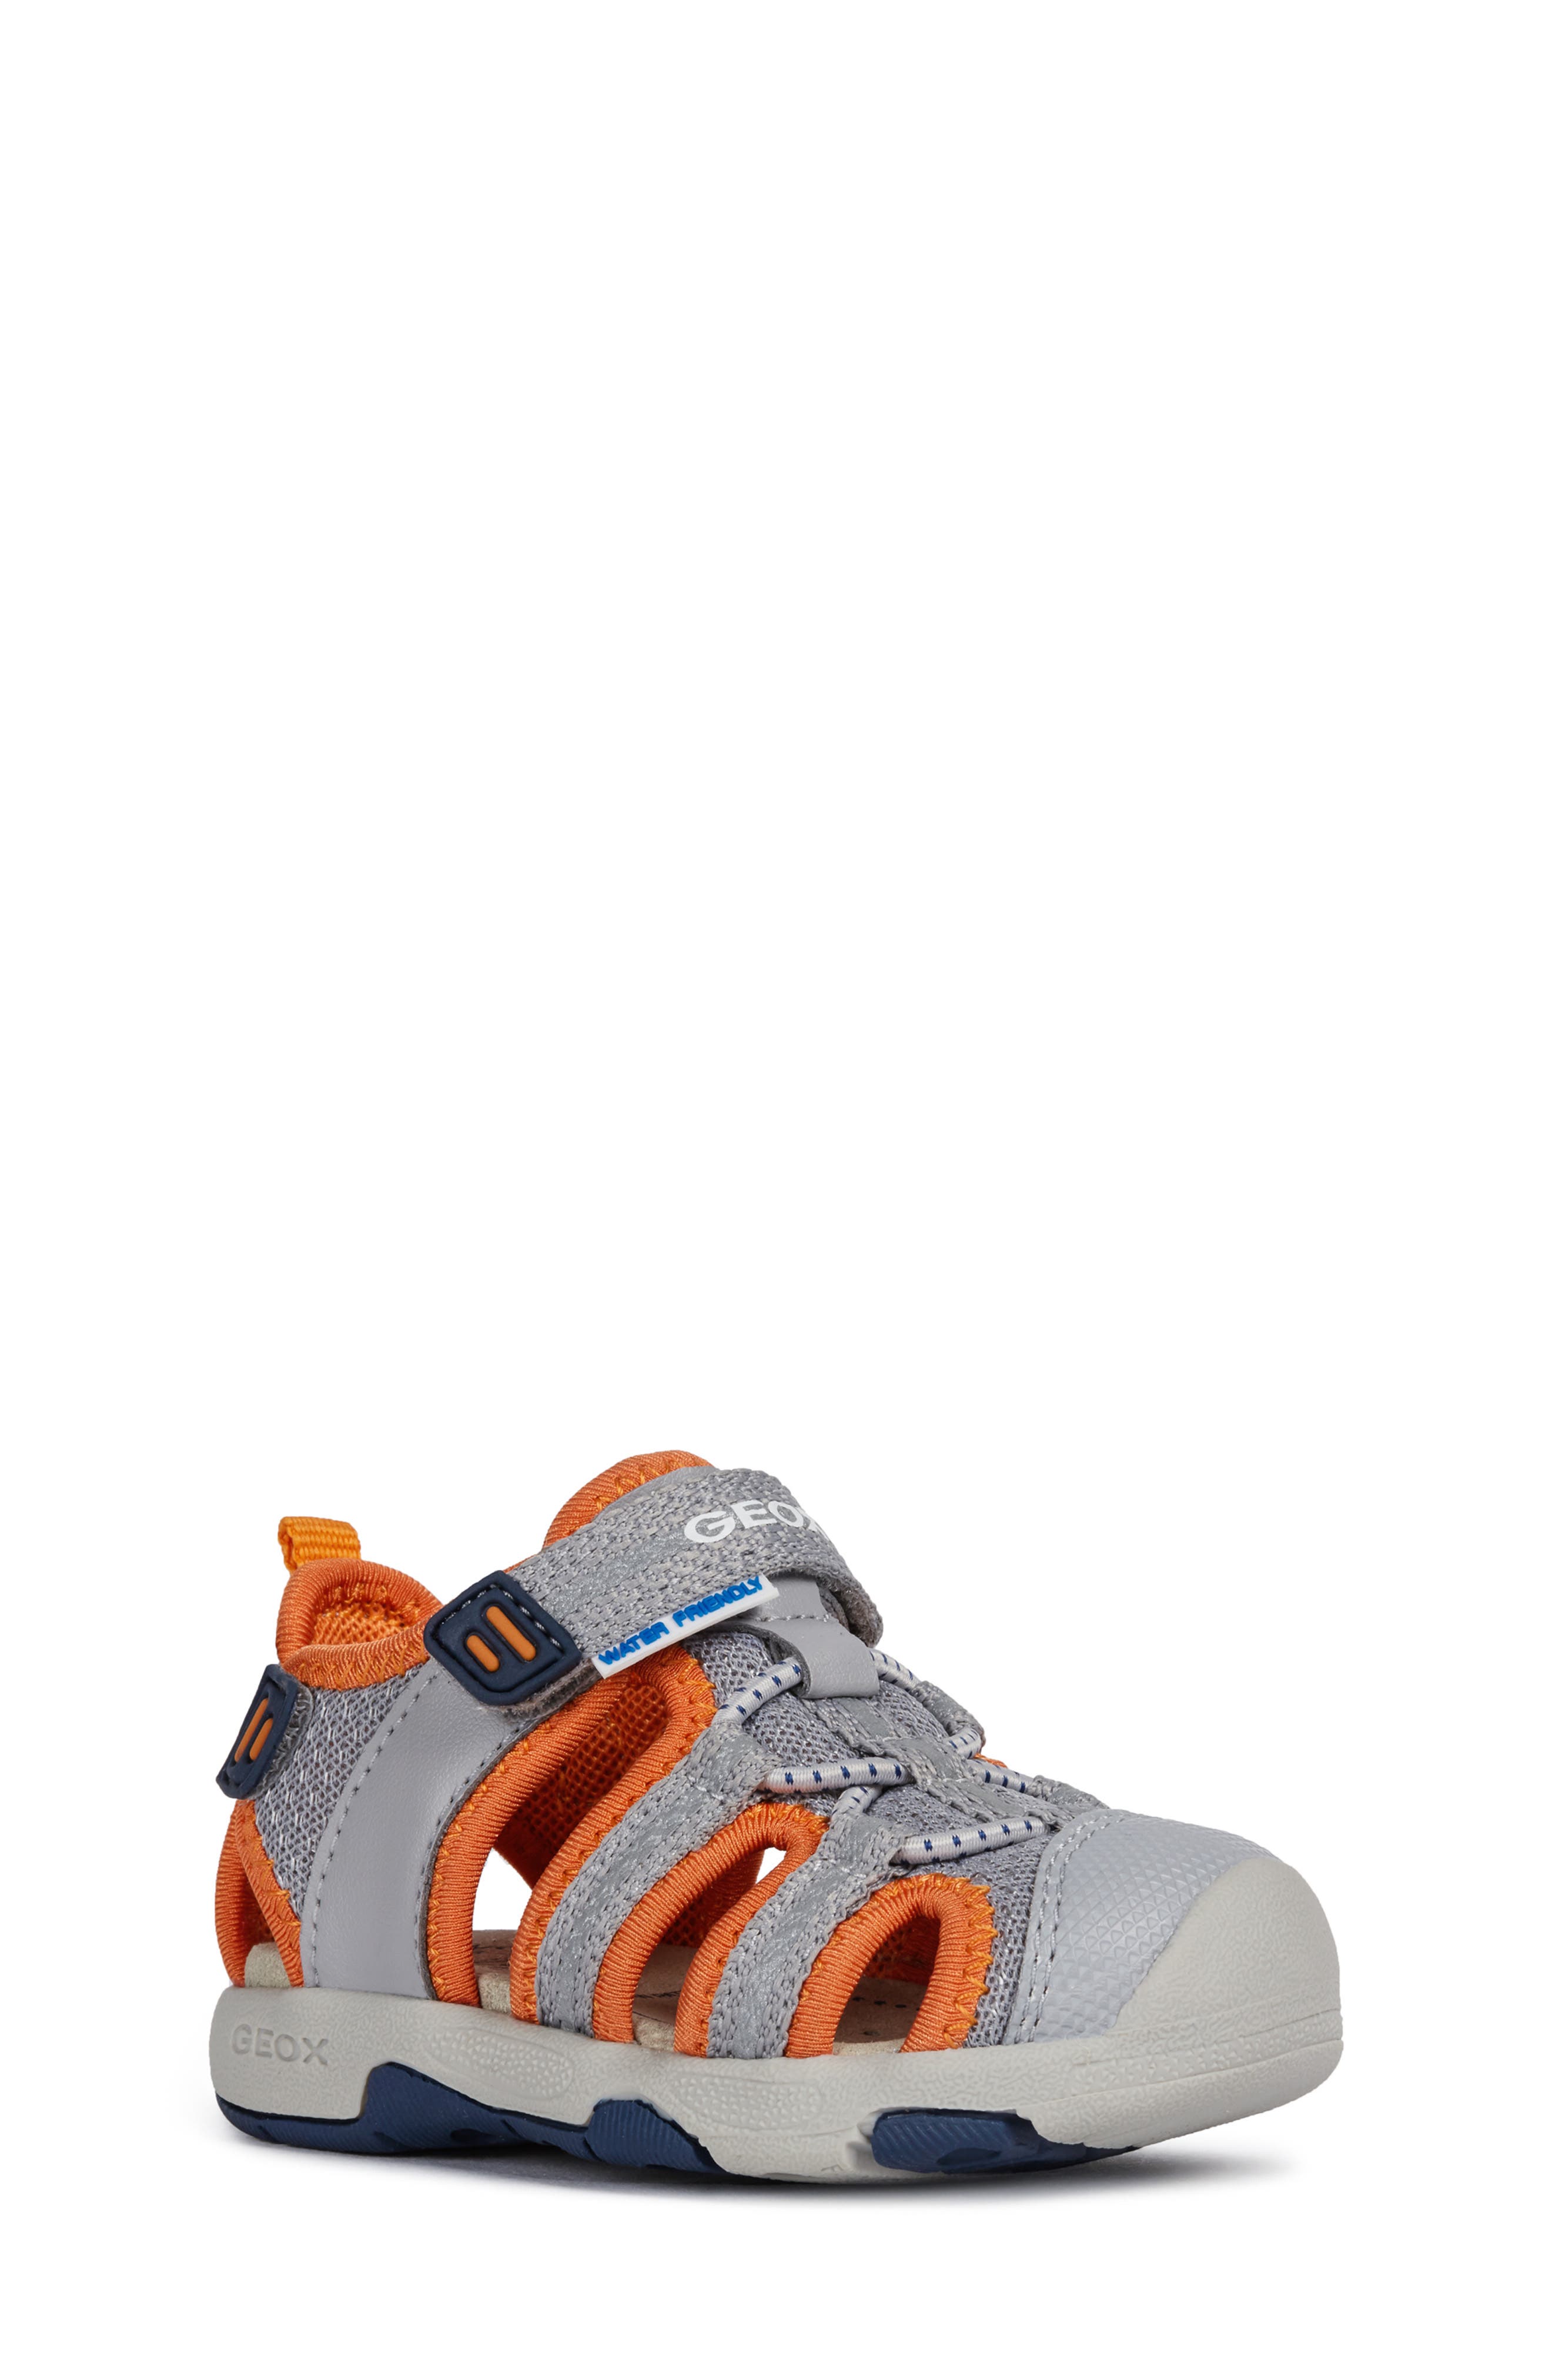 geox first walker shoes